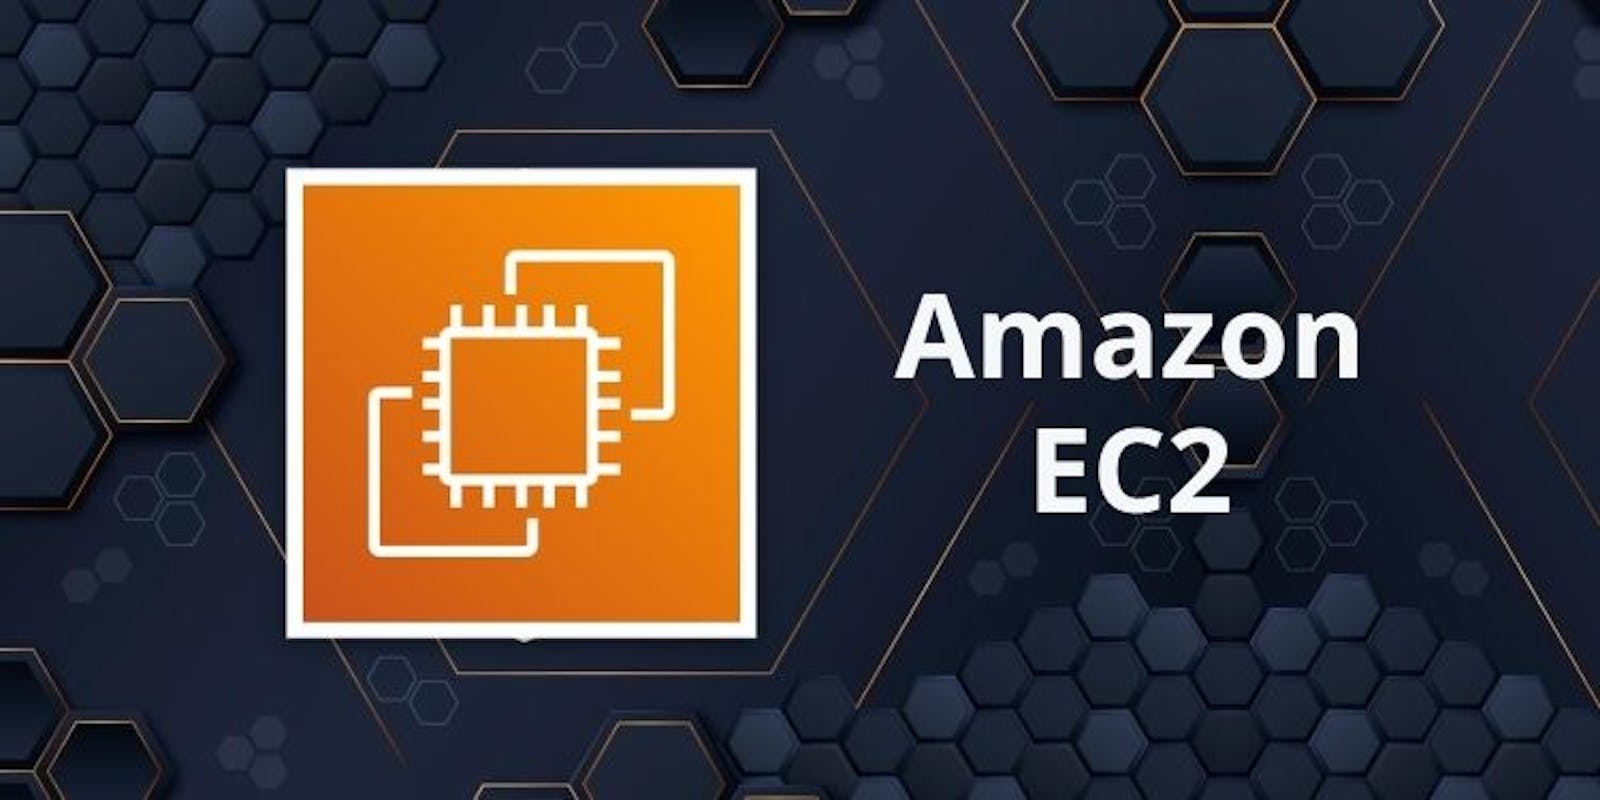 What is Amazon EC2 and why we use it?